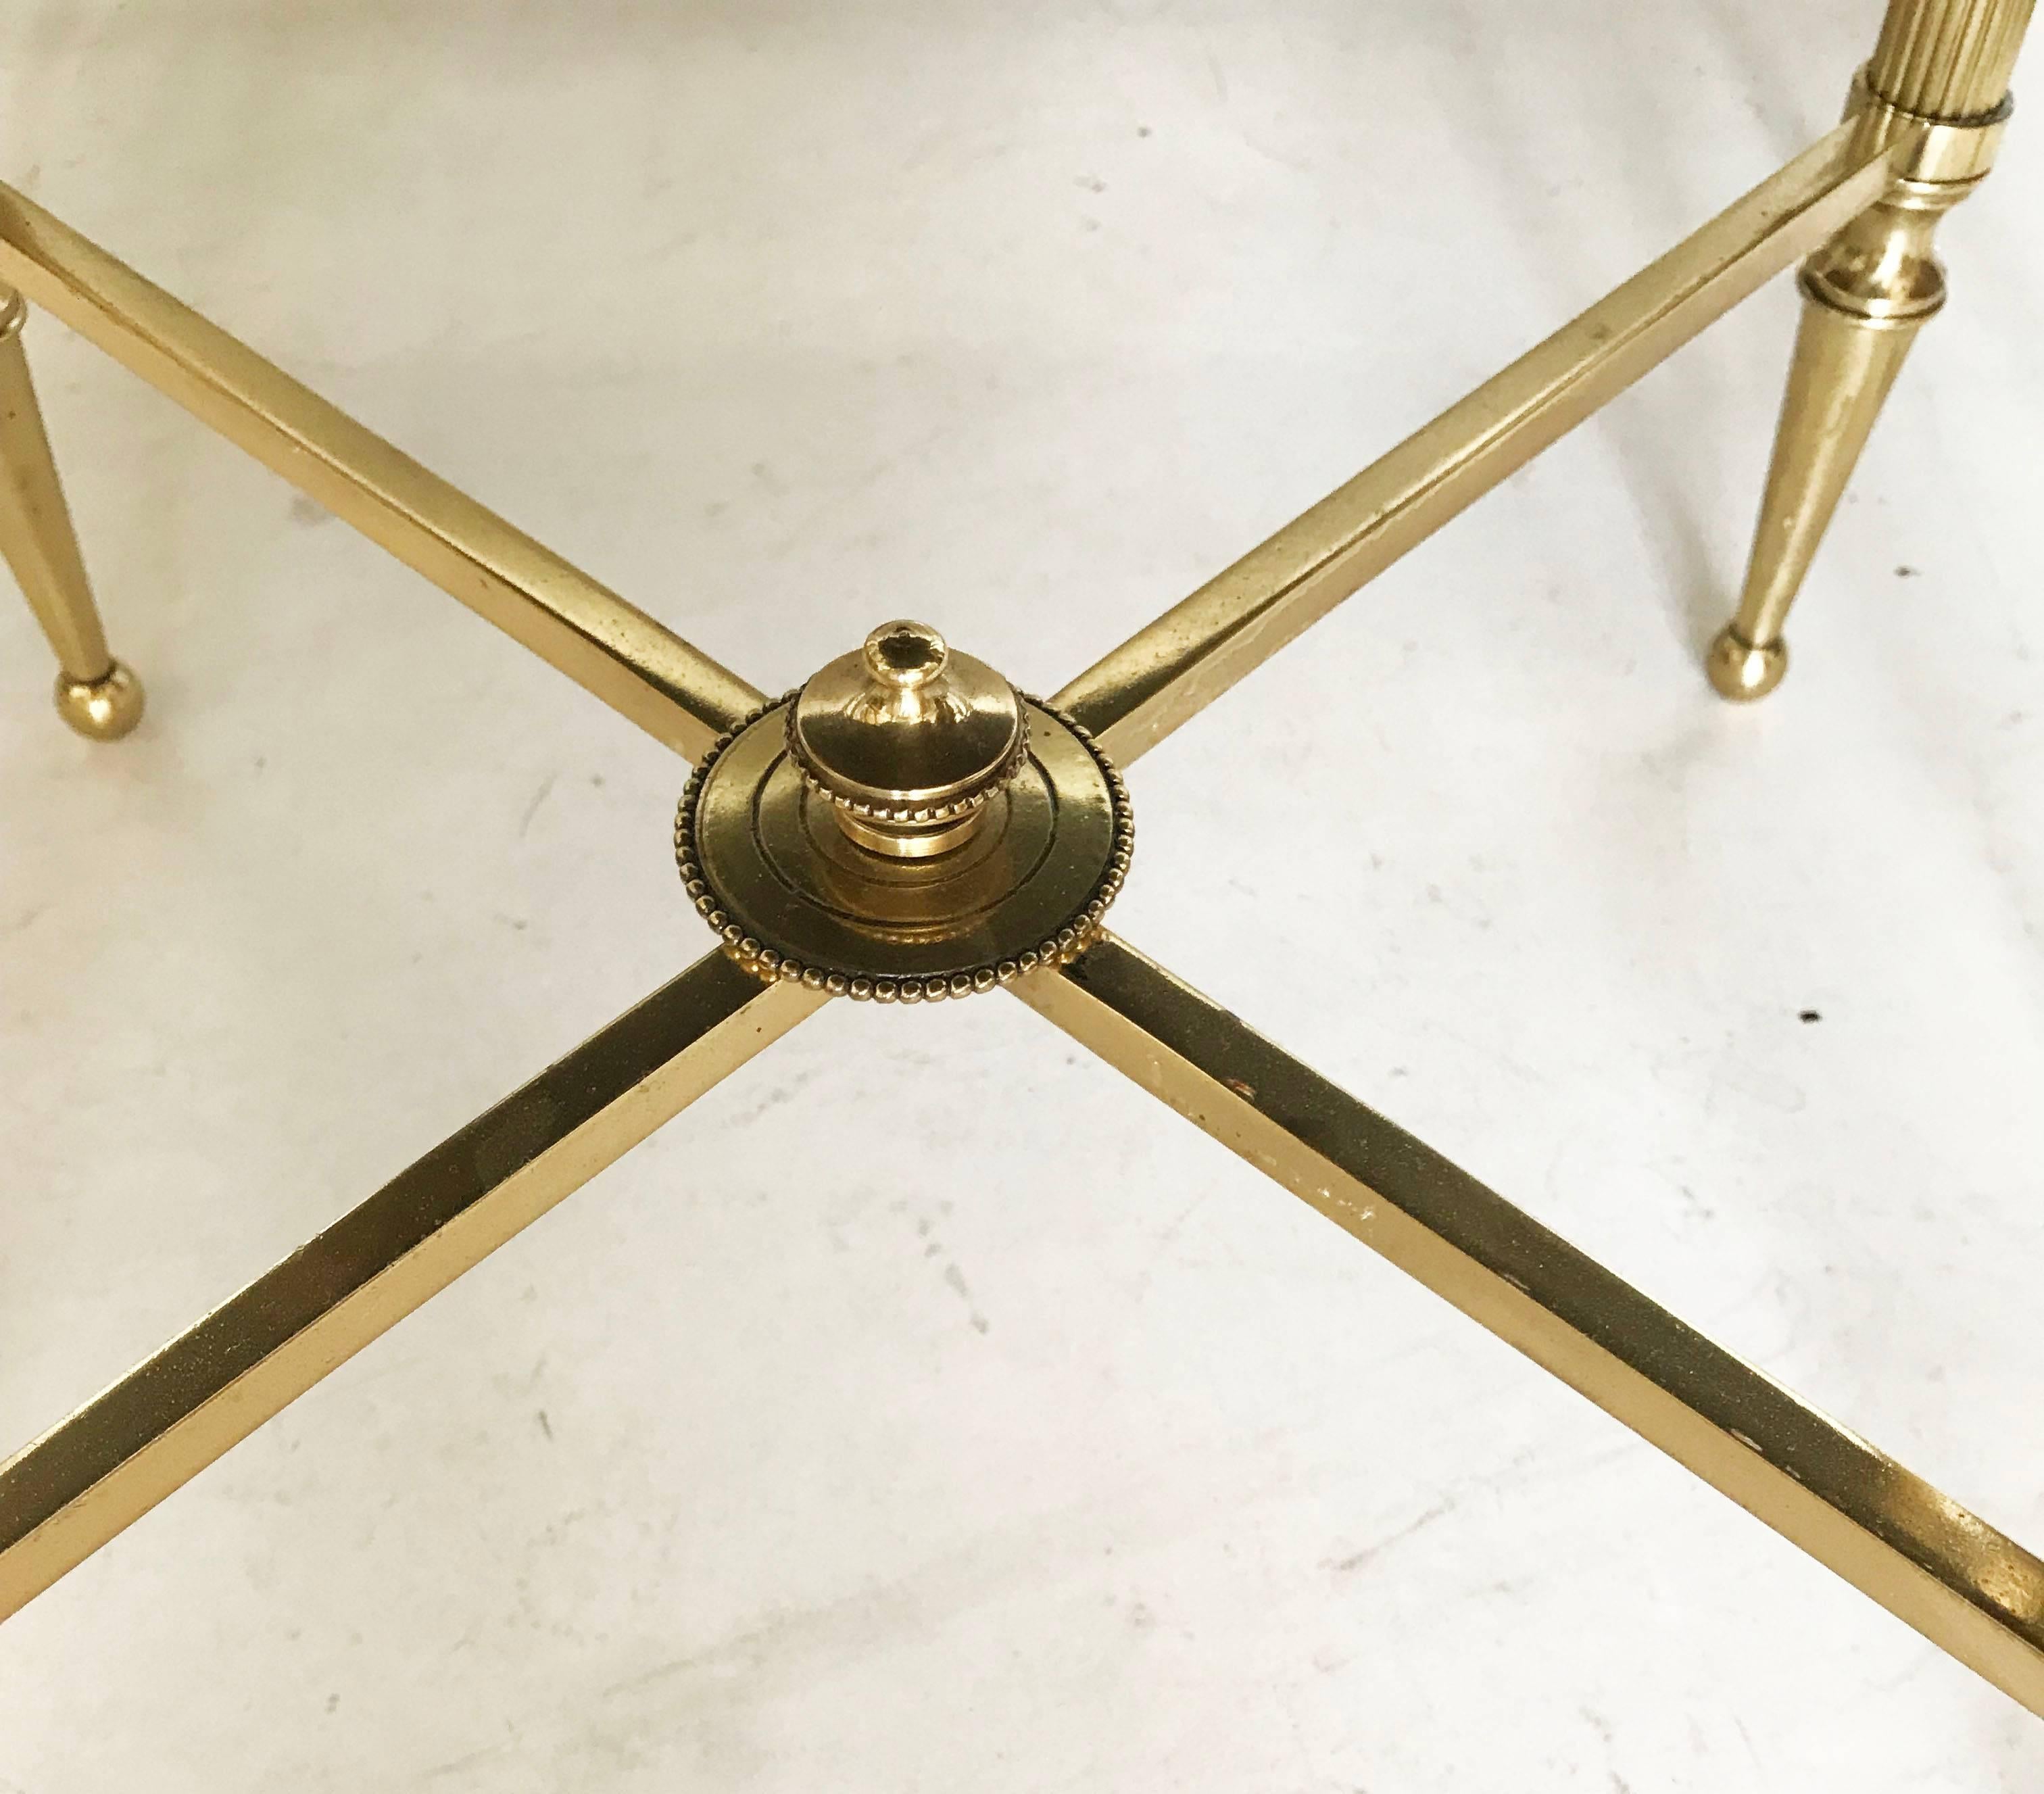 Set of 3 Maison Lancel Nesting Tables Brass Wood Top French Mid-Century Modern In Good Condition For Sale In Miami, FL